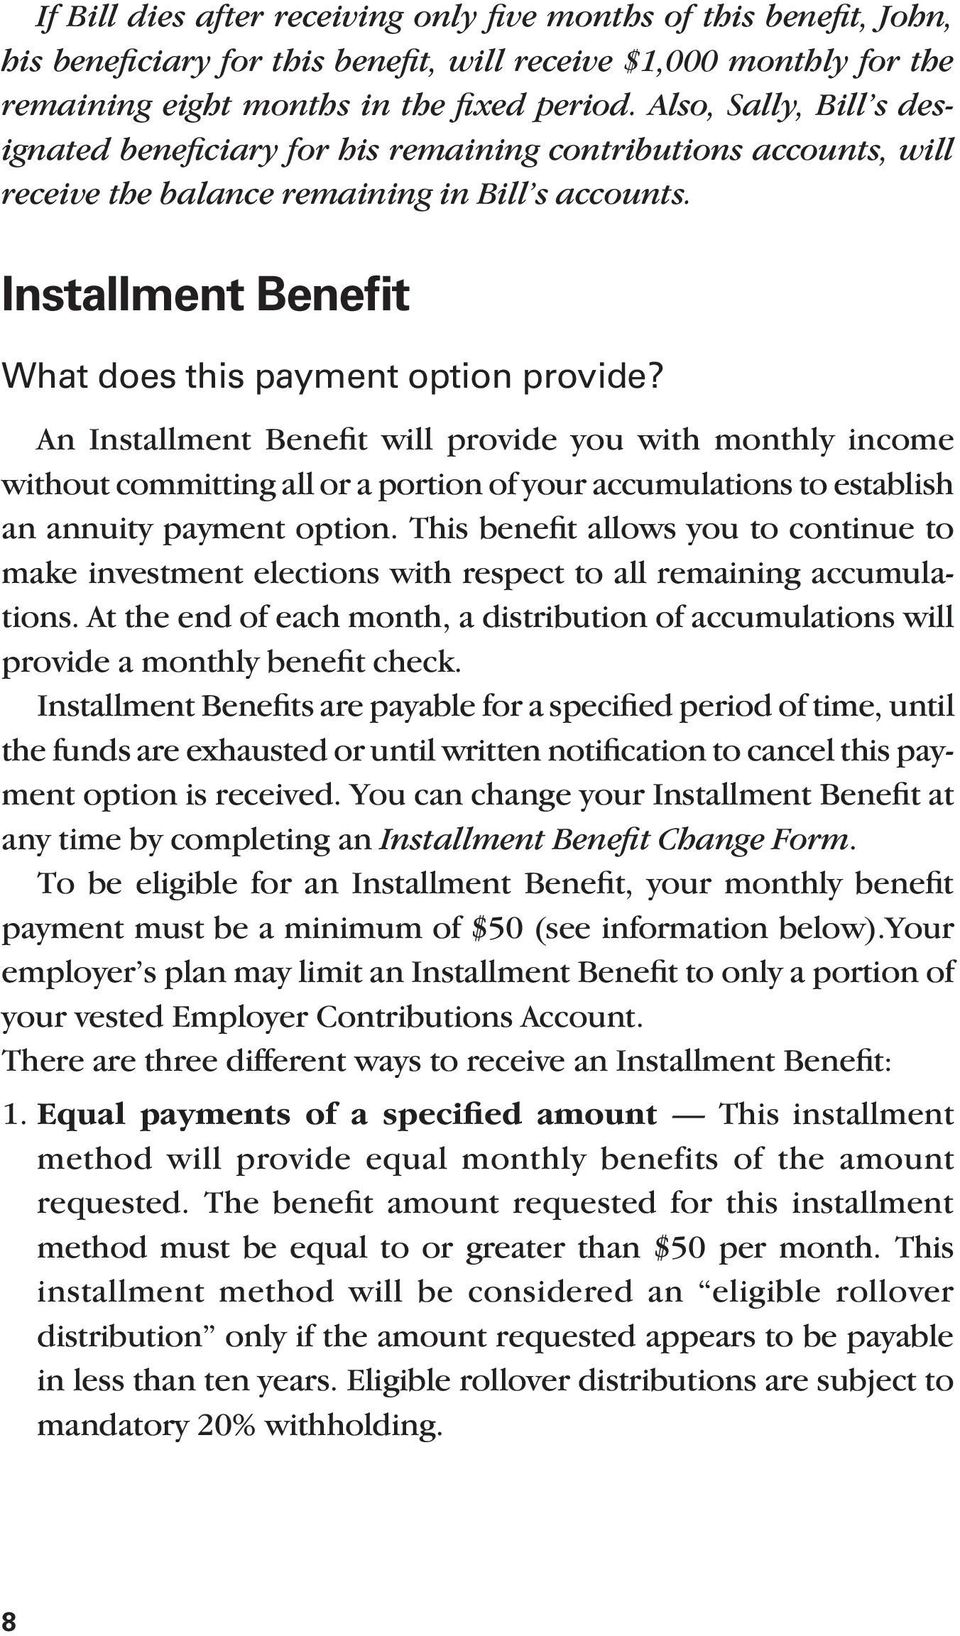 An Installment Benefit will provide you with monthly income without committing all or a portion of your accumulations to establish an annuity payment option.